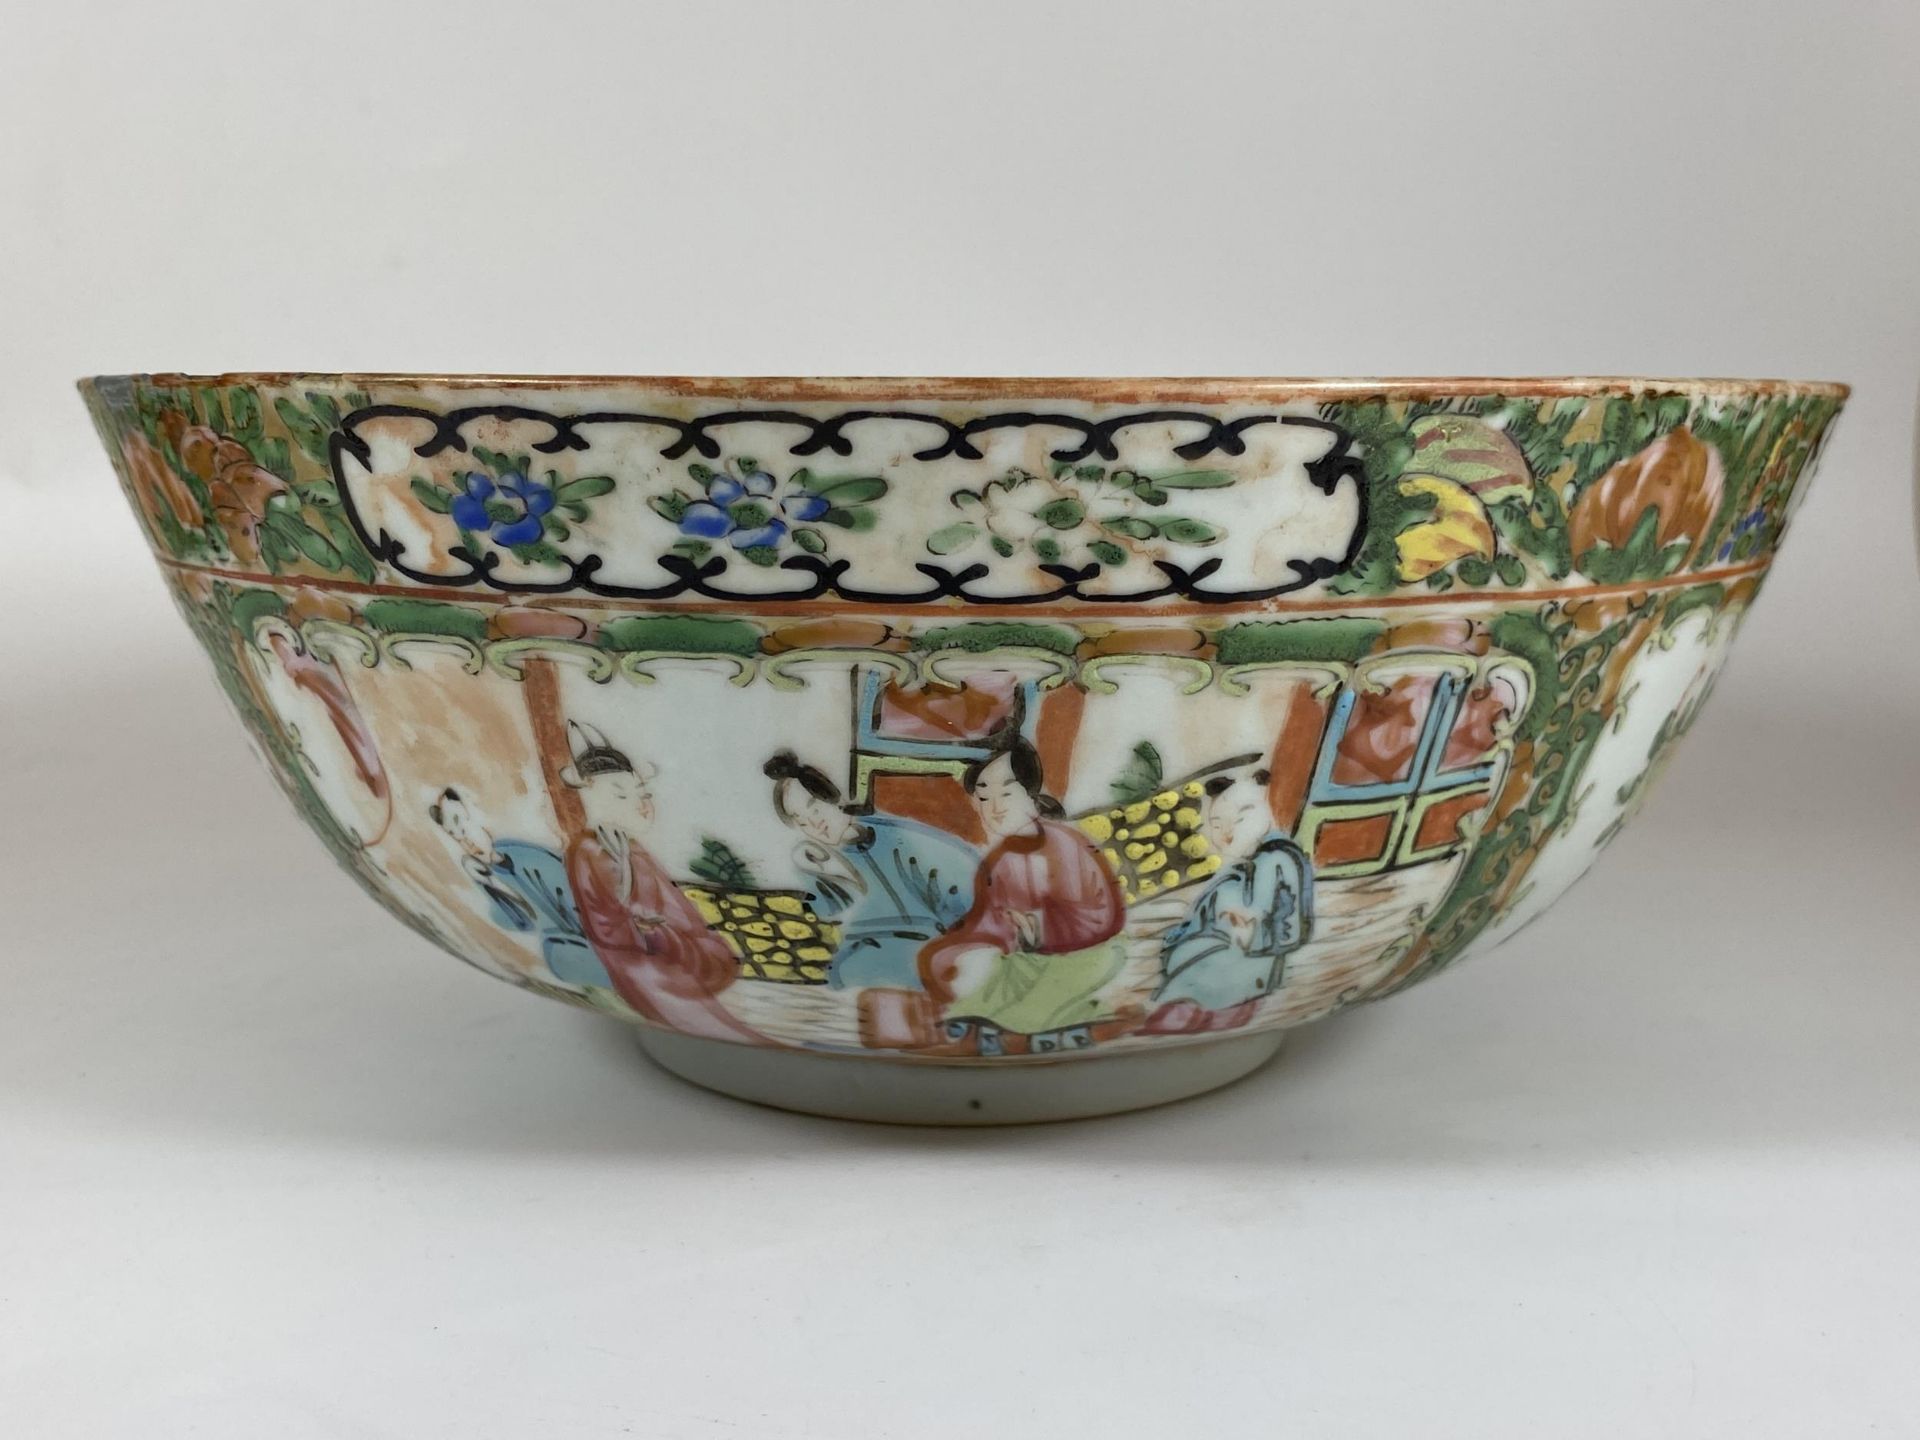 A 19TH CENTURY CHINESE CANTON FAMILLE ROSE MEDALLION PUNCH / FRUIT BOWL WITH FIGURES, BIRDS AND - Image 2 of 9